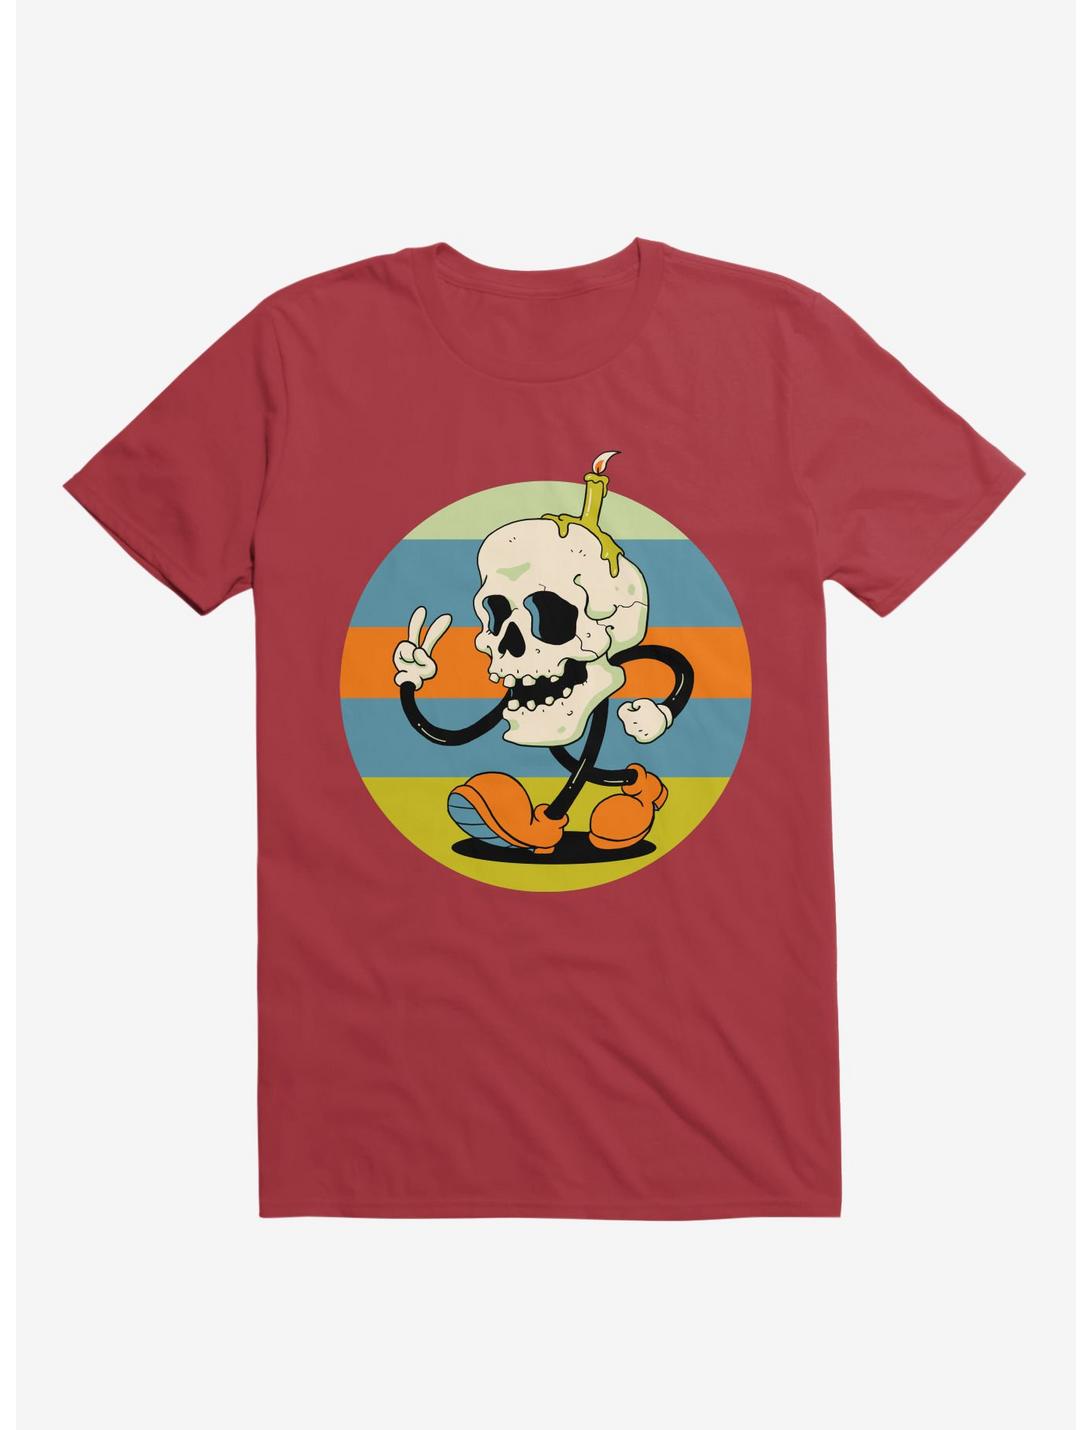 Skull Candle Boy Red T-Shirt, RED, hi-res